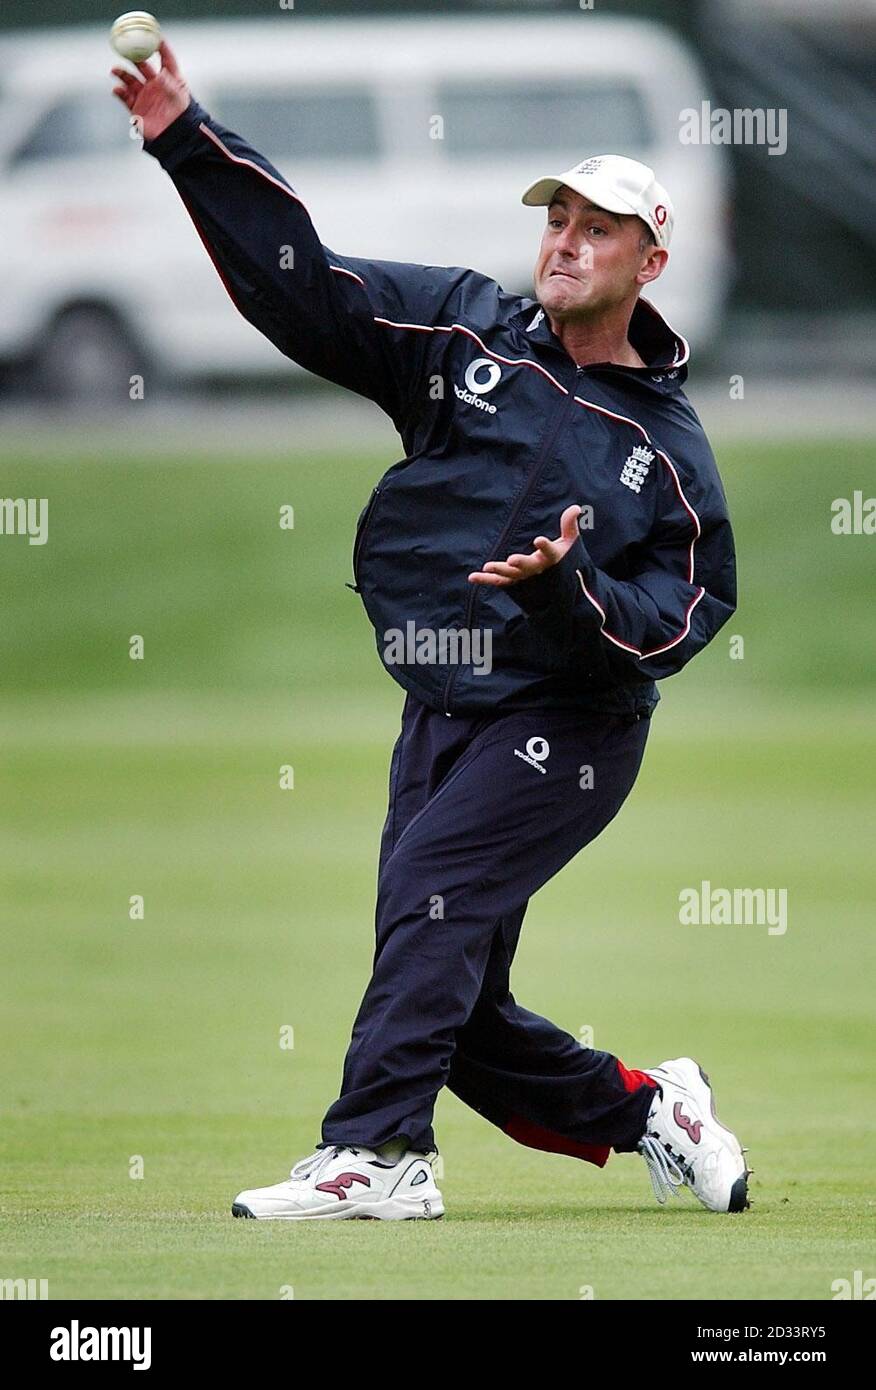 England's Graham Thorpe in action during the team's net session at Jade Stadium, Christchurch, New Zealand.  England and New Zealand meet at the stadium tomorrow in the first one-day international in the five match series.   Stock Photo